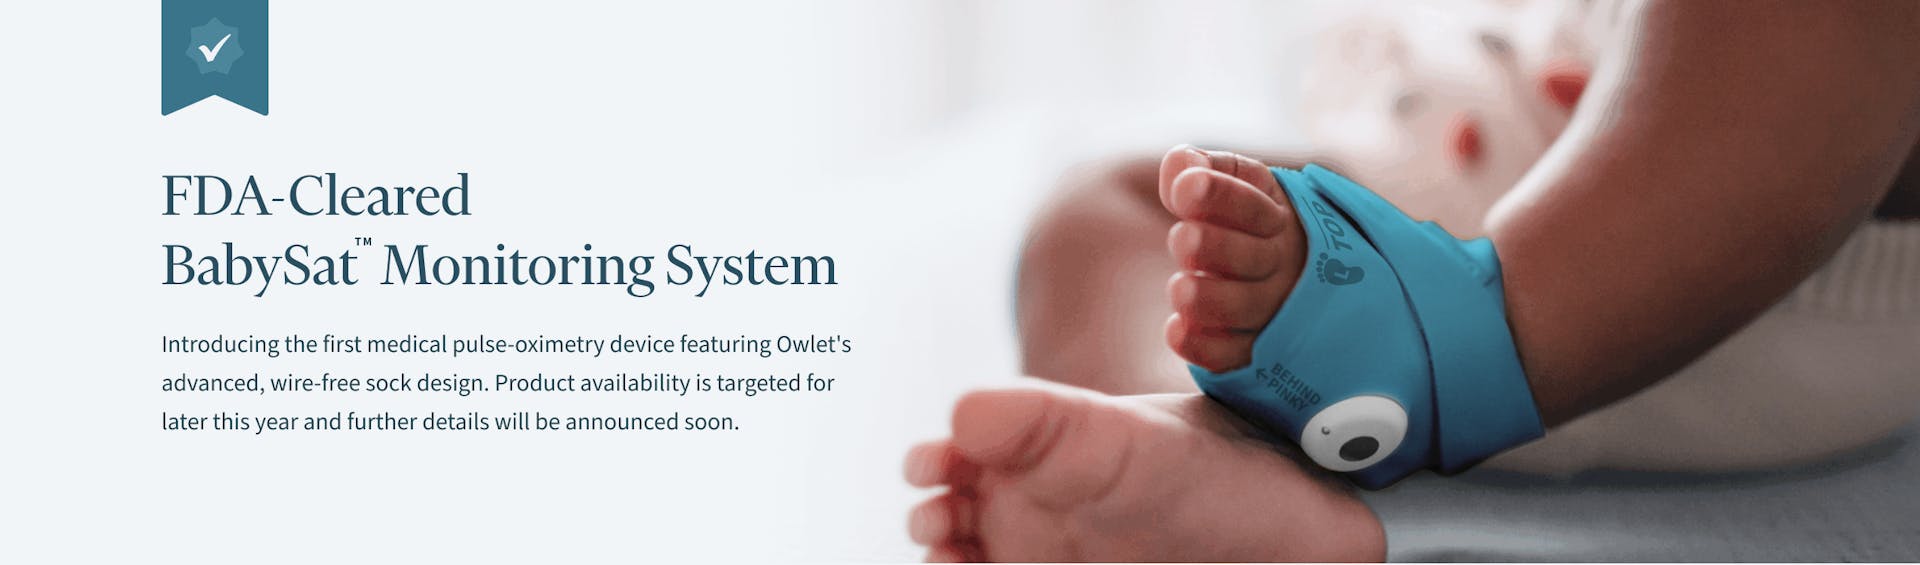 Owlet is FDA CLEARED 1 COLOR CORRECTED